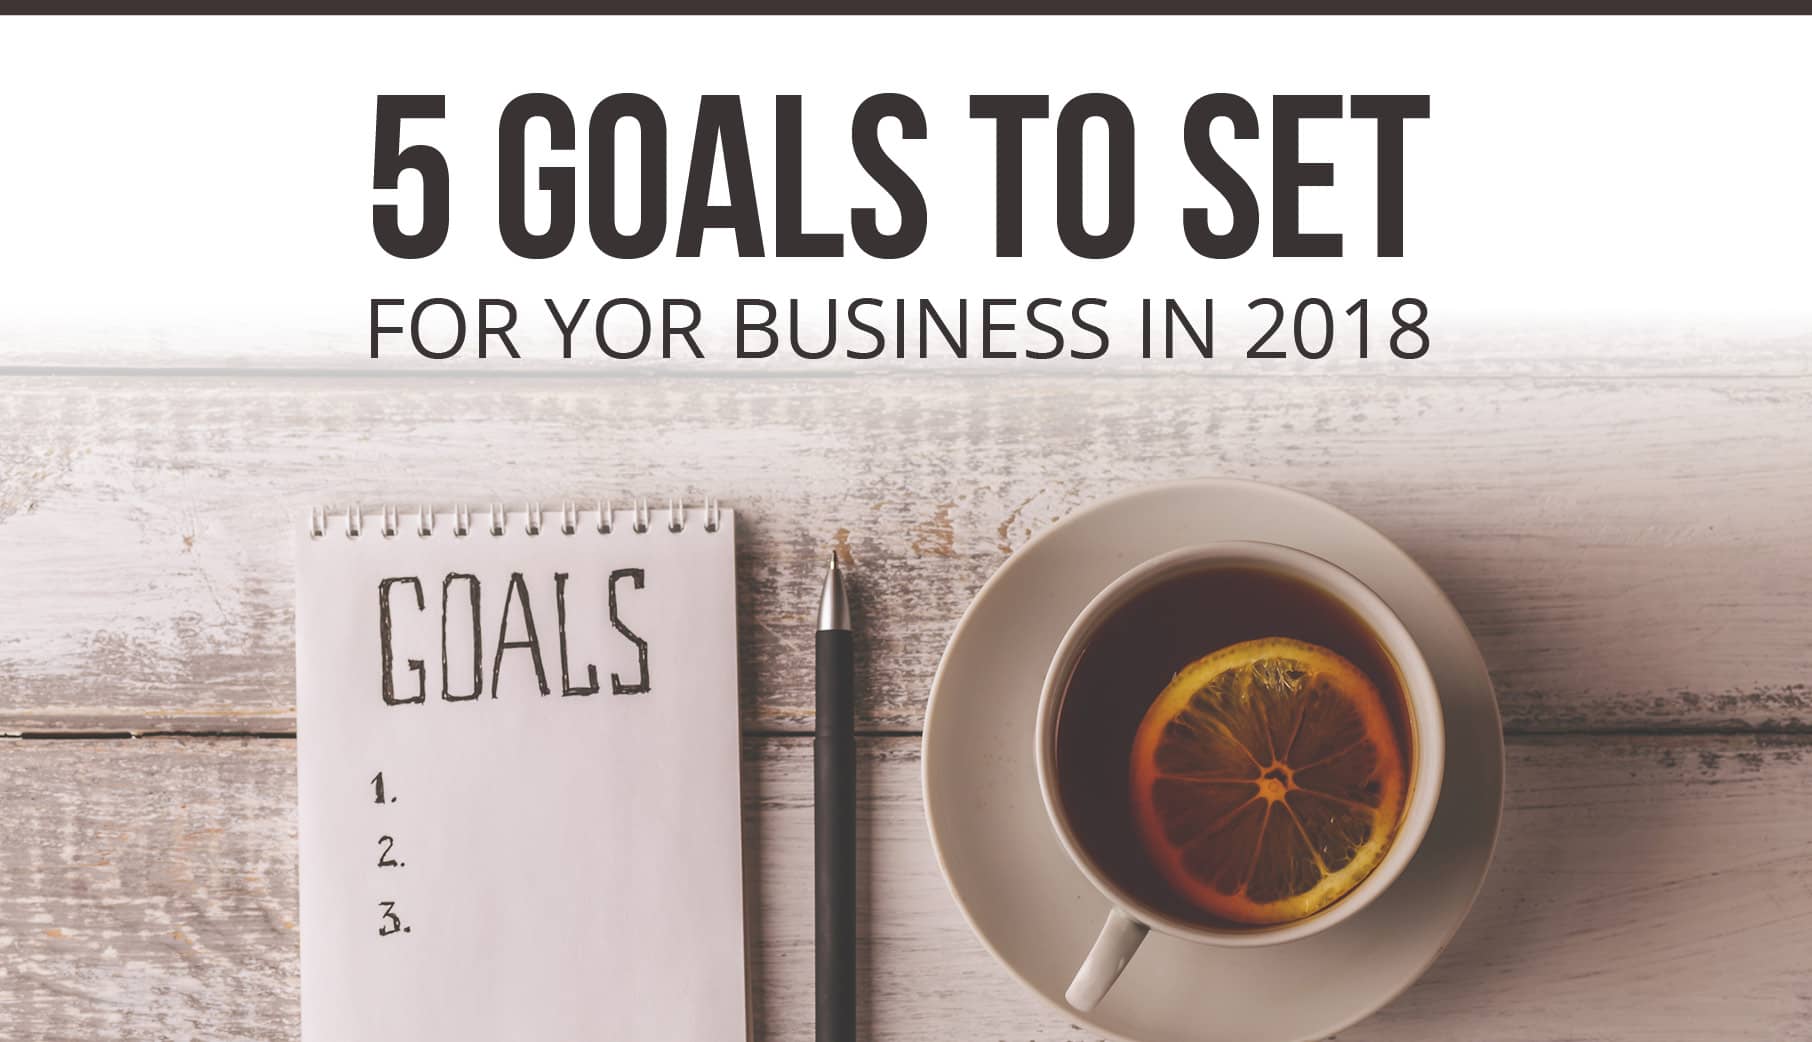 5 Goals For Success To Set For Your Laser Cutter Business In The New Year